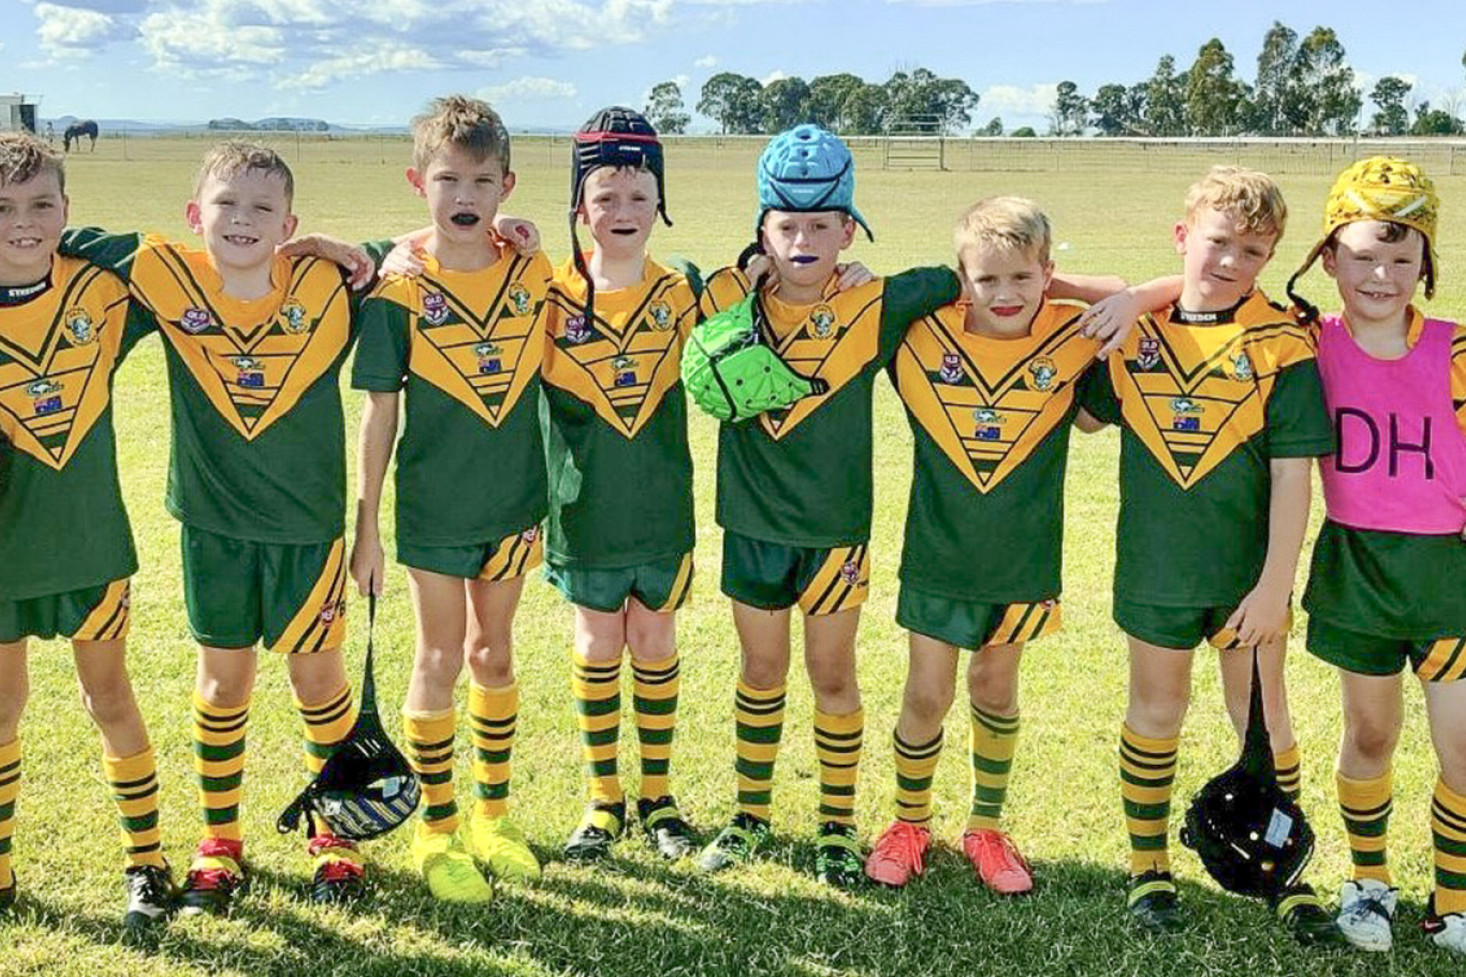 Wattles Juniors Under 9 team who were in outstanding form against Tenterfield on Saturday. Left: Kit Gilmore, George Mullen, Oliver Willet, Buddy Turner, James Patterson, Henry Ferguson, Jay Townsend, Leo Williams. (Image – Shadai Daley)